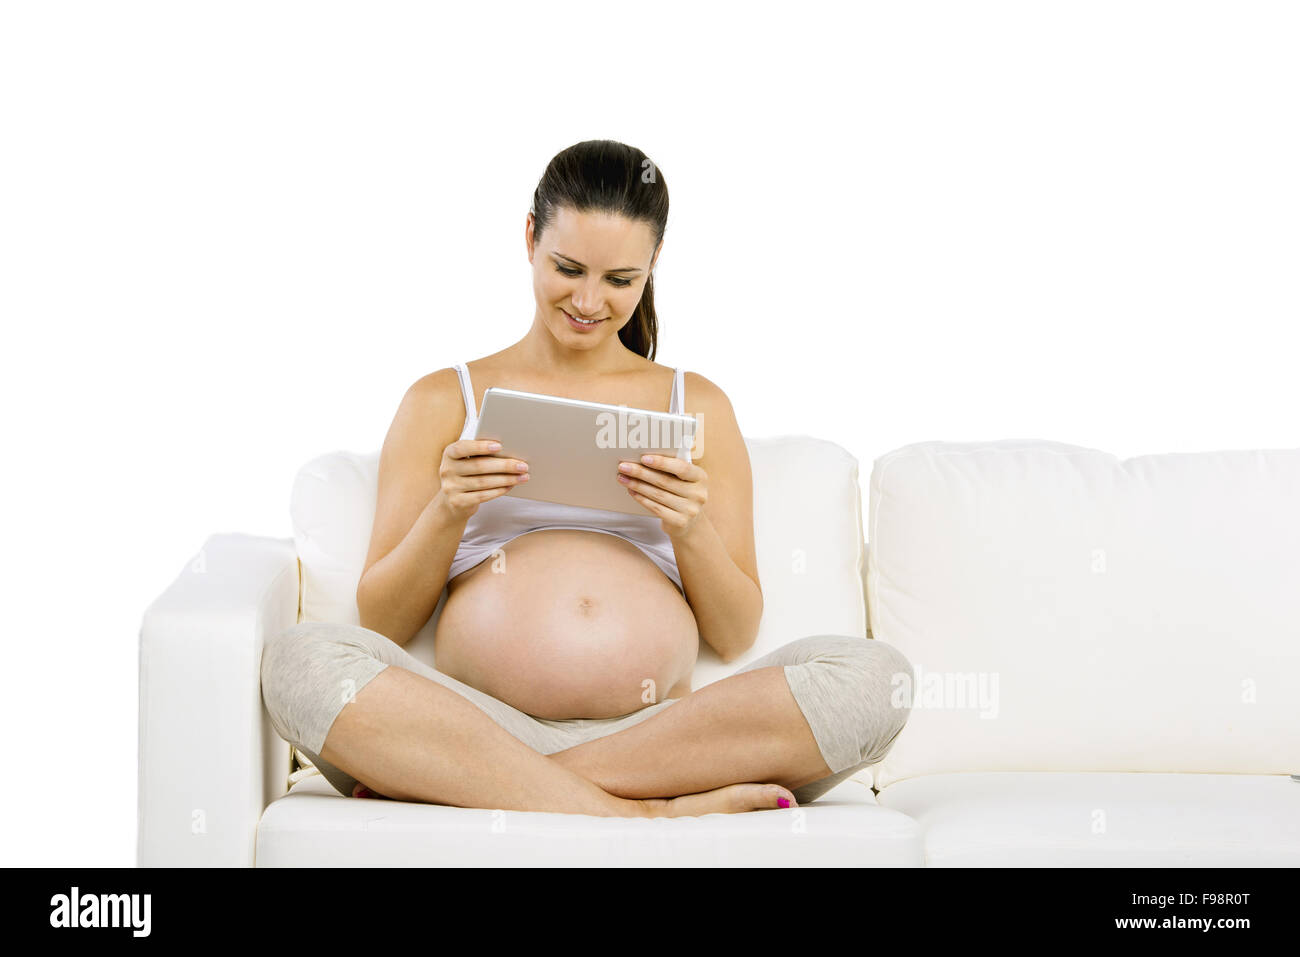 Studio portrait of pregnant woman with digital tablet sitting on sofa isolated on white background Stock Photo